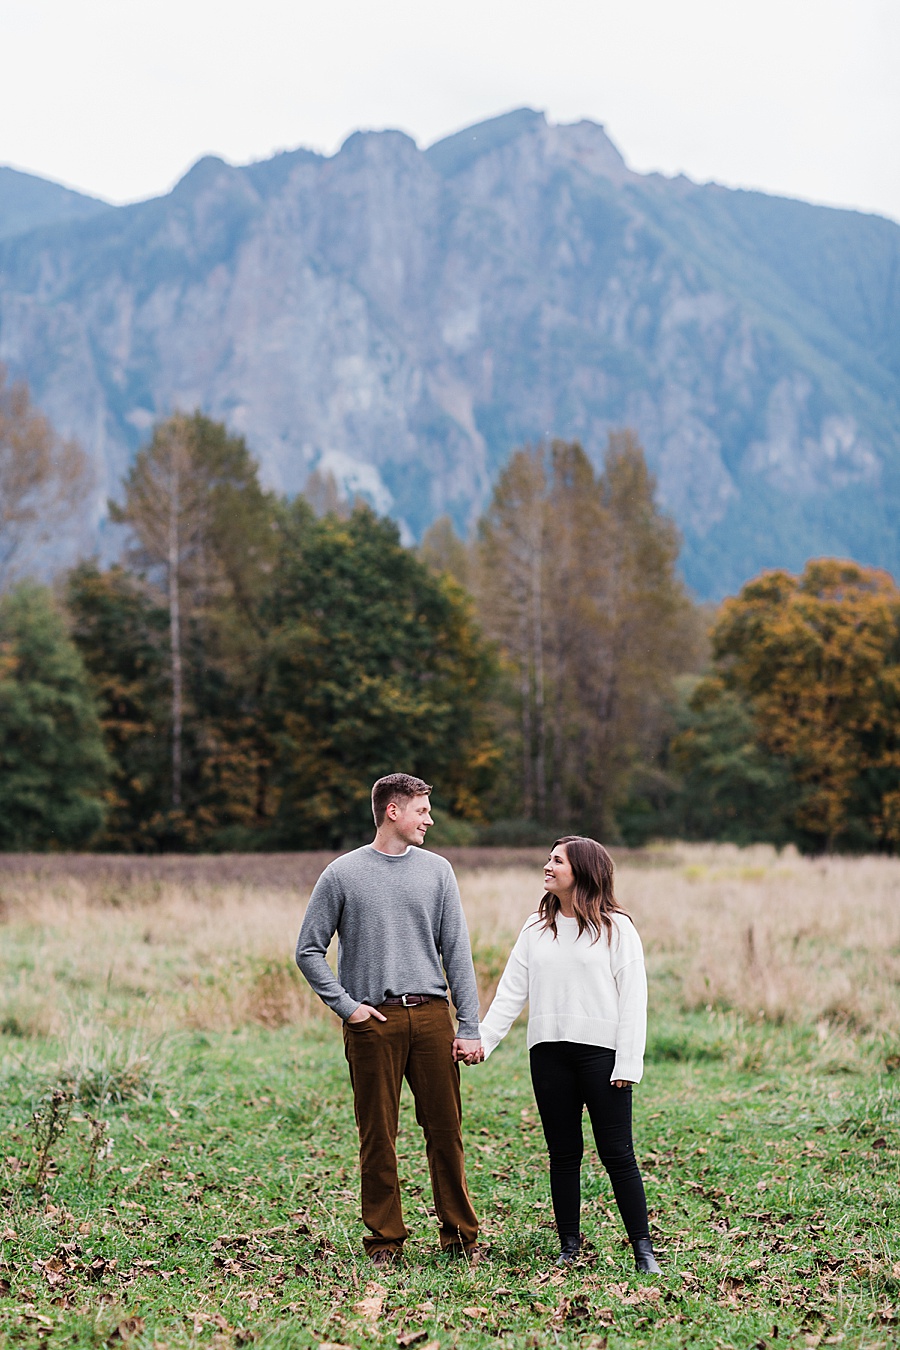 North Bend Engagement Photos with Seattle mountain wedding photographer Amy Galbraith